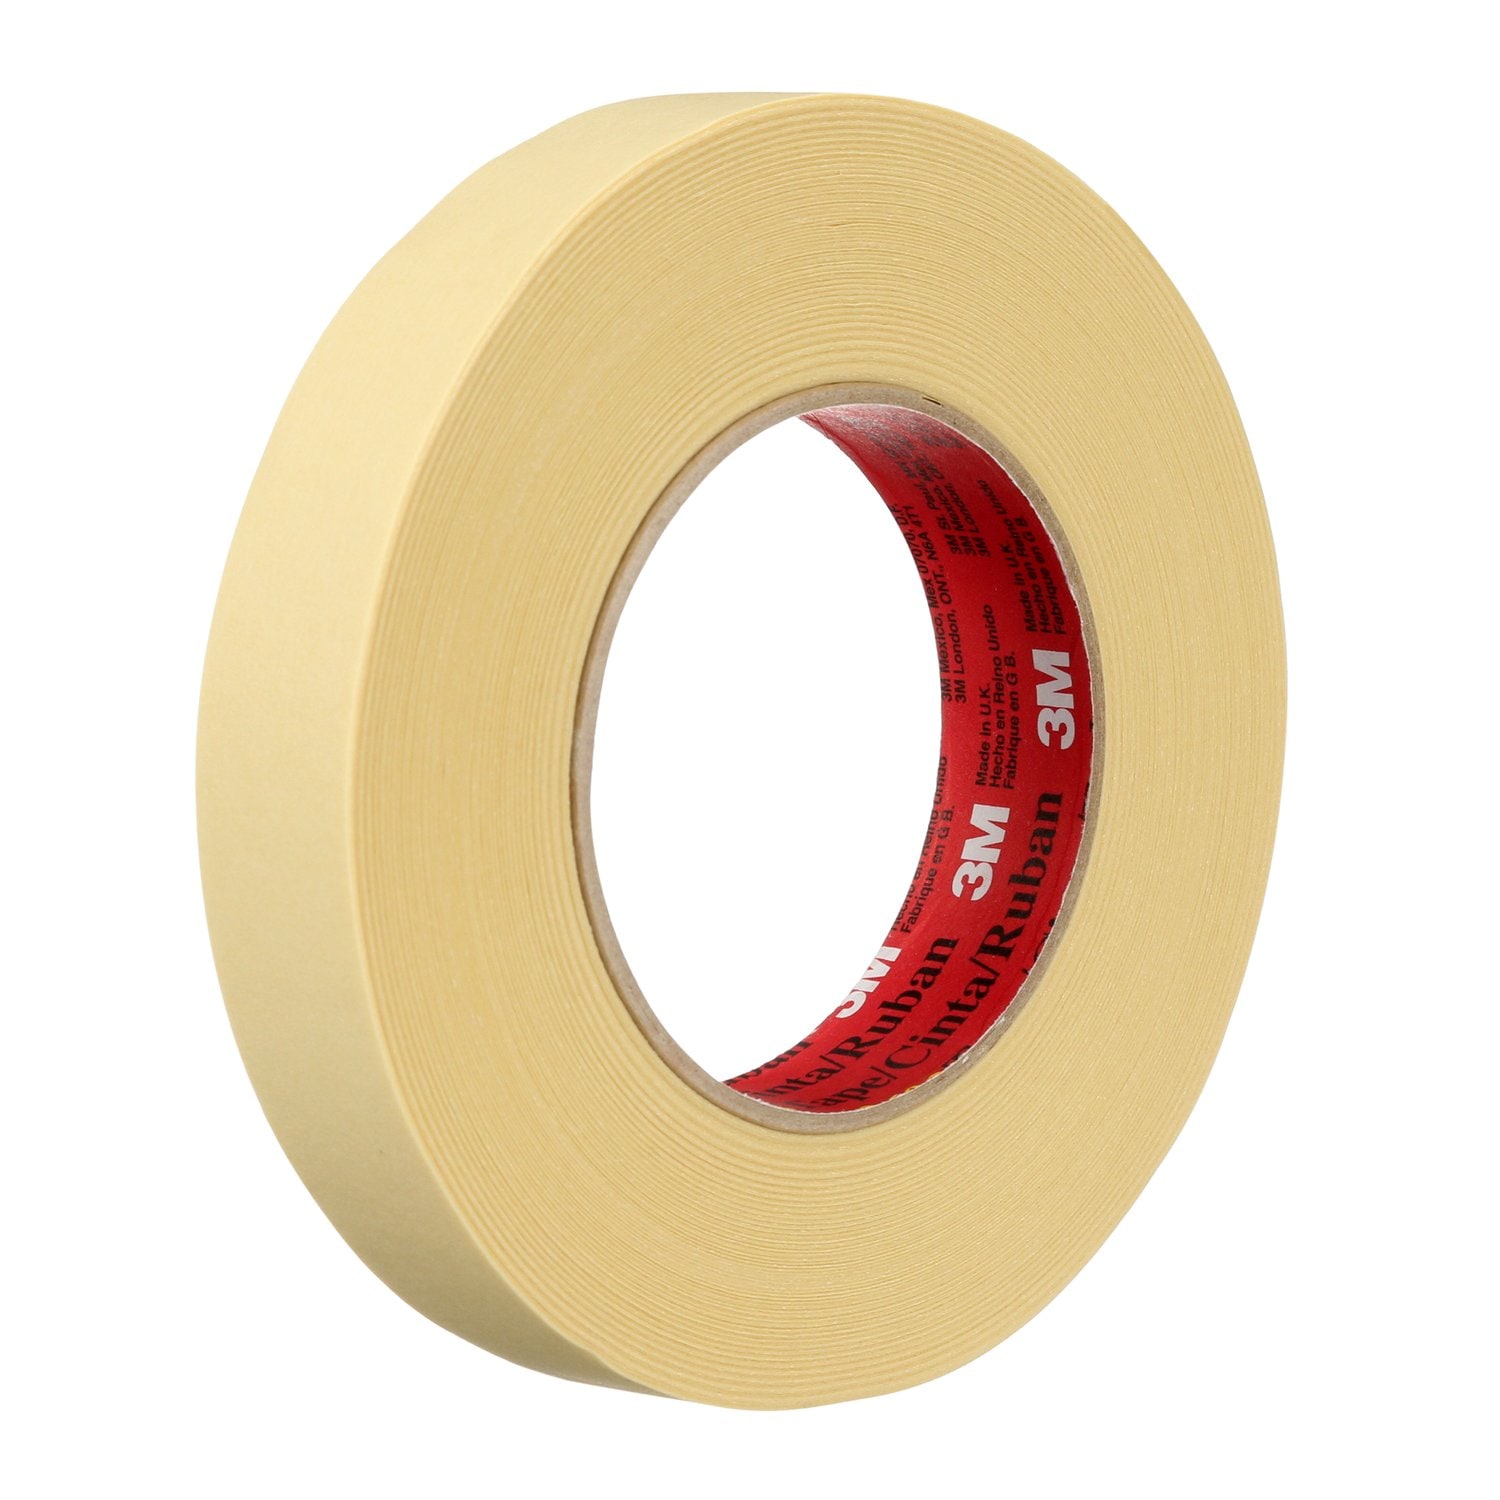 Color Masking Tape Rolls-7 Rolls 2.54 Cm X 20 Yards (approximately